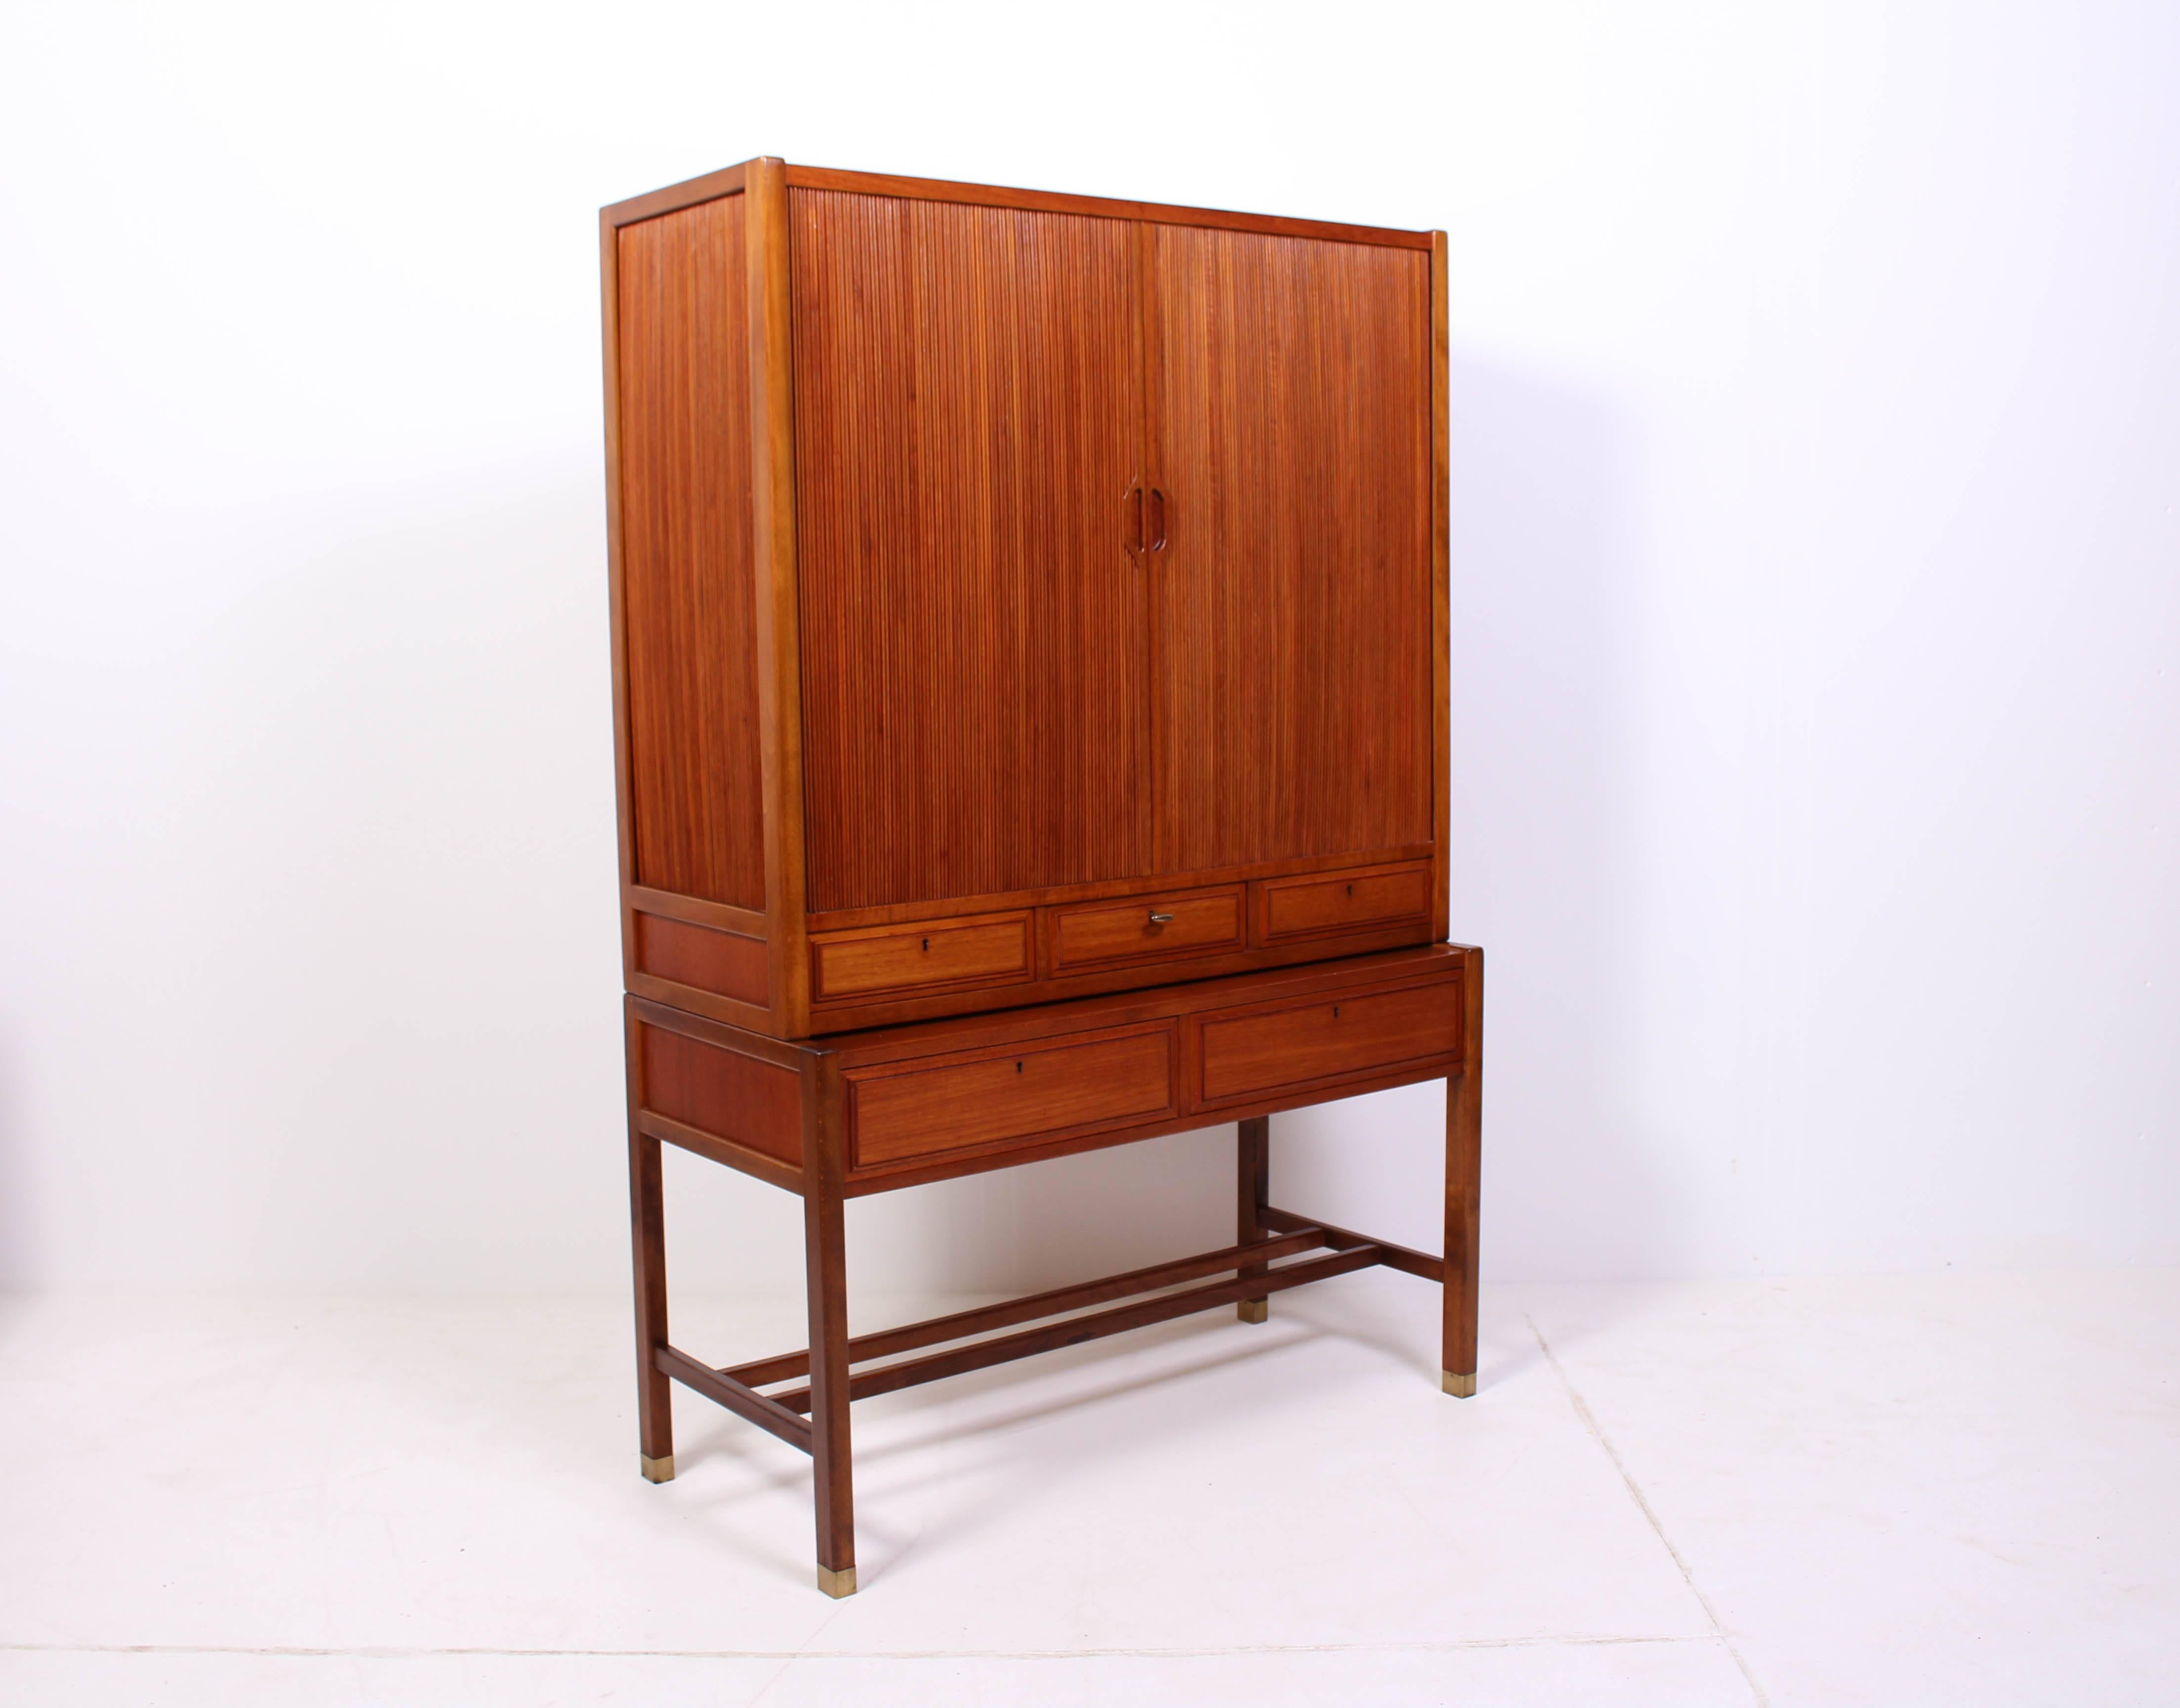 Midcentury Swedish cabinet by Carl-Axel Acking for Bodafors. The cabinet has many details such as tambour doors and brass feet. It is in very good vintage condition with minor signs of usage.
  
     